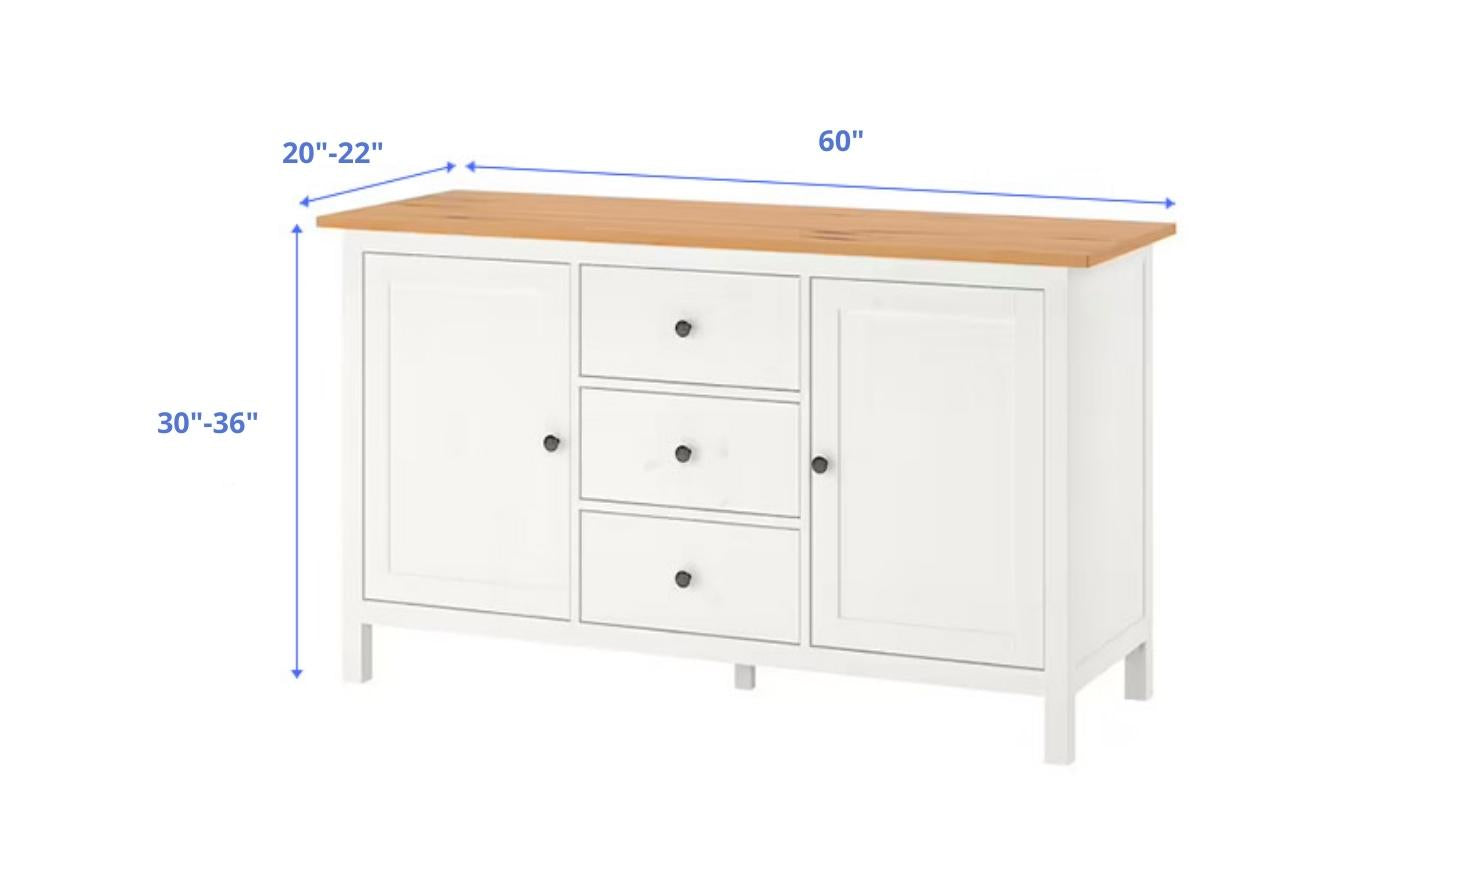 What is the right size sideboard or buffet